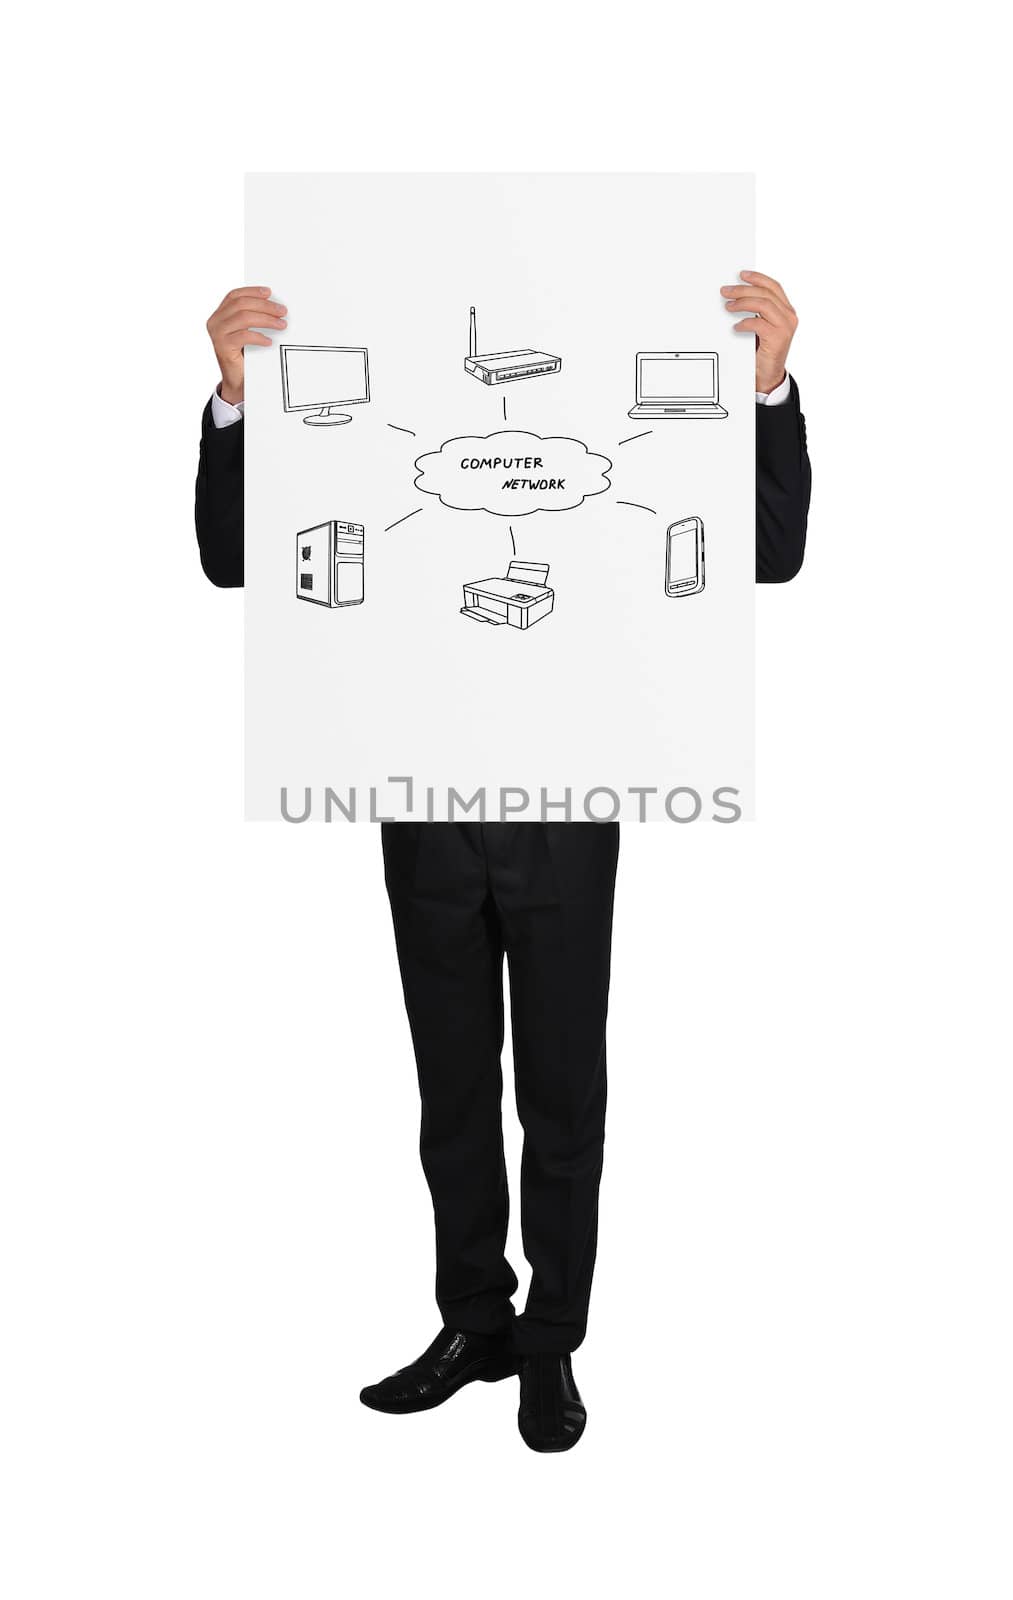 businessman in tuxedo holding poster with computer network